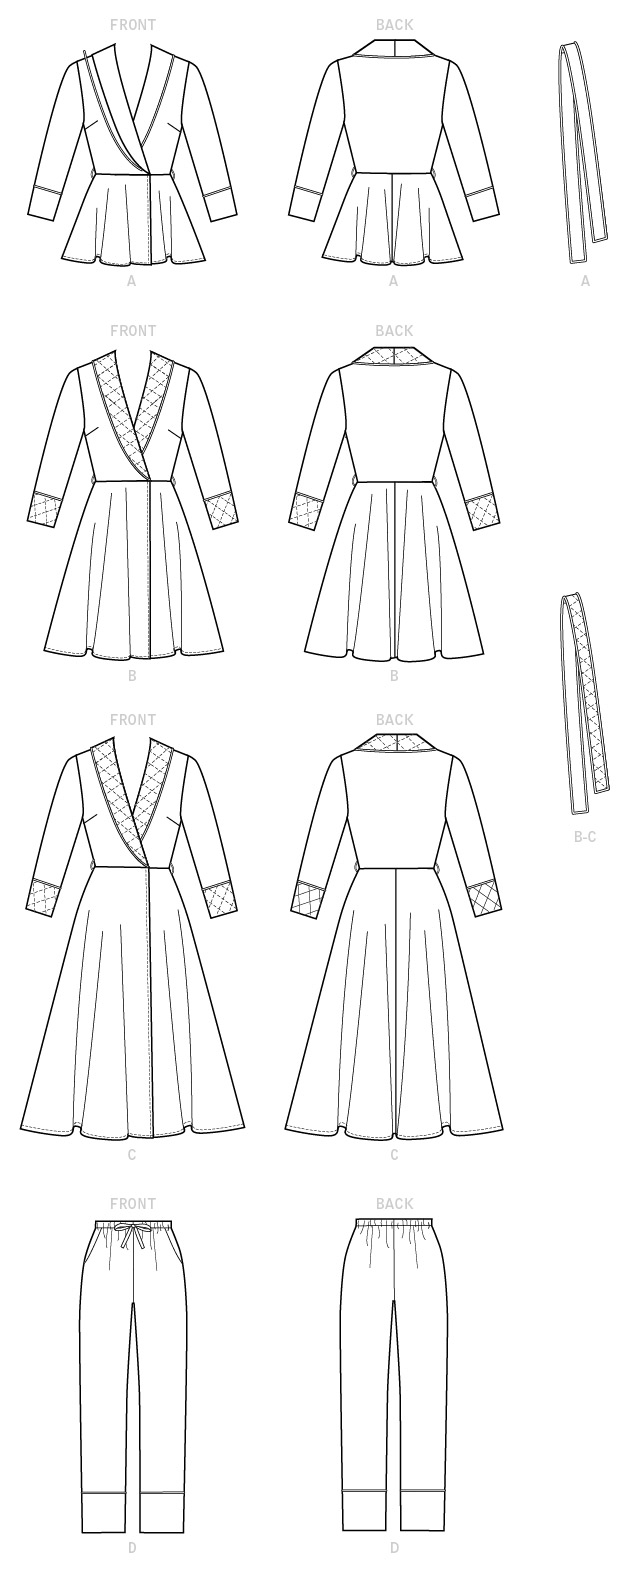 M7875 sewing pattern for pyjamas and Robe from Jaycotts Sewing Supplies